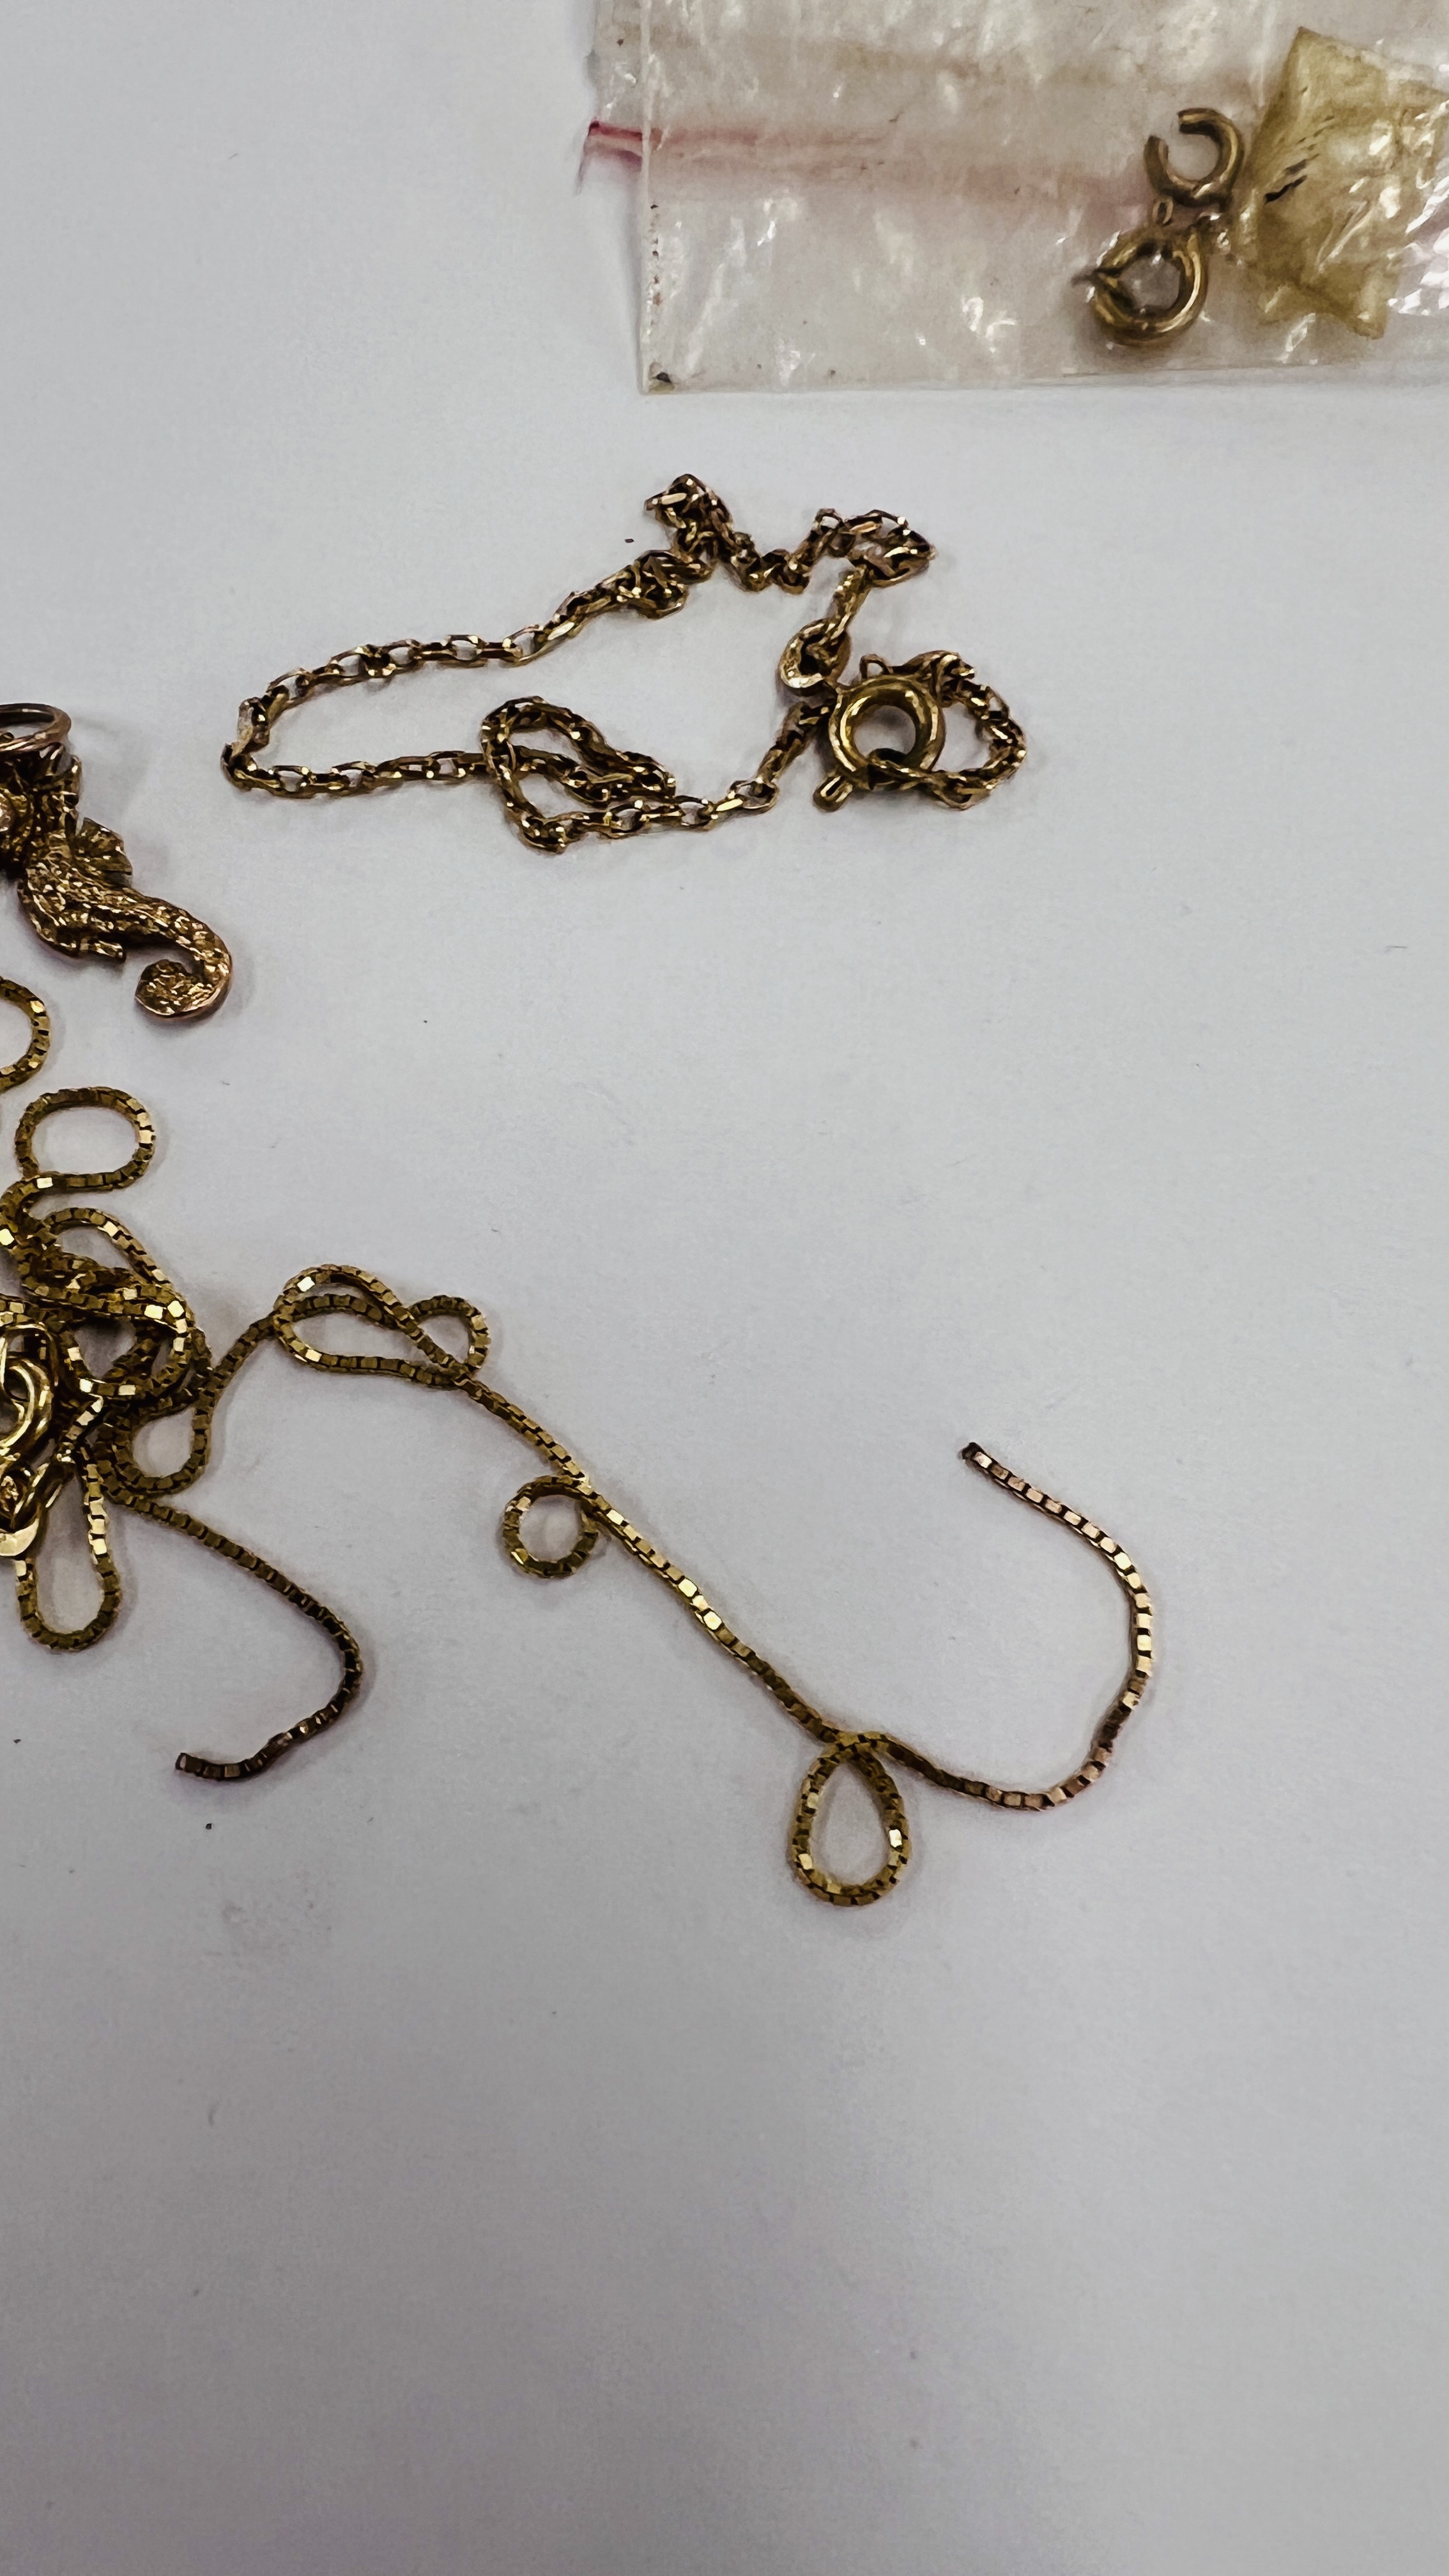 A FINE 9CT GOLD BRACELET AND NECKLACE A/F ALONG WITH A YELLOW METAL SEAHORSE PENDANT / CHARM. - Image 4 of 5